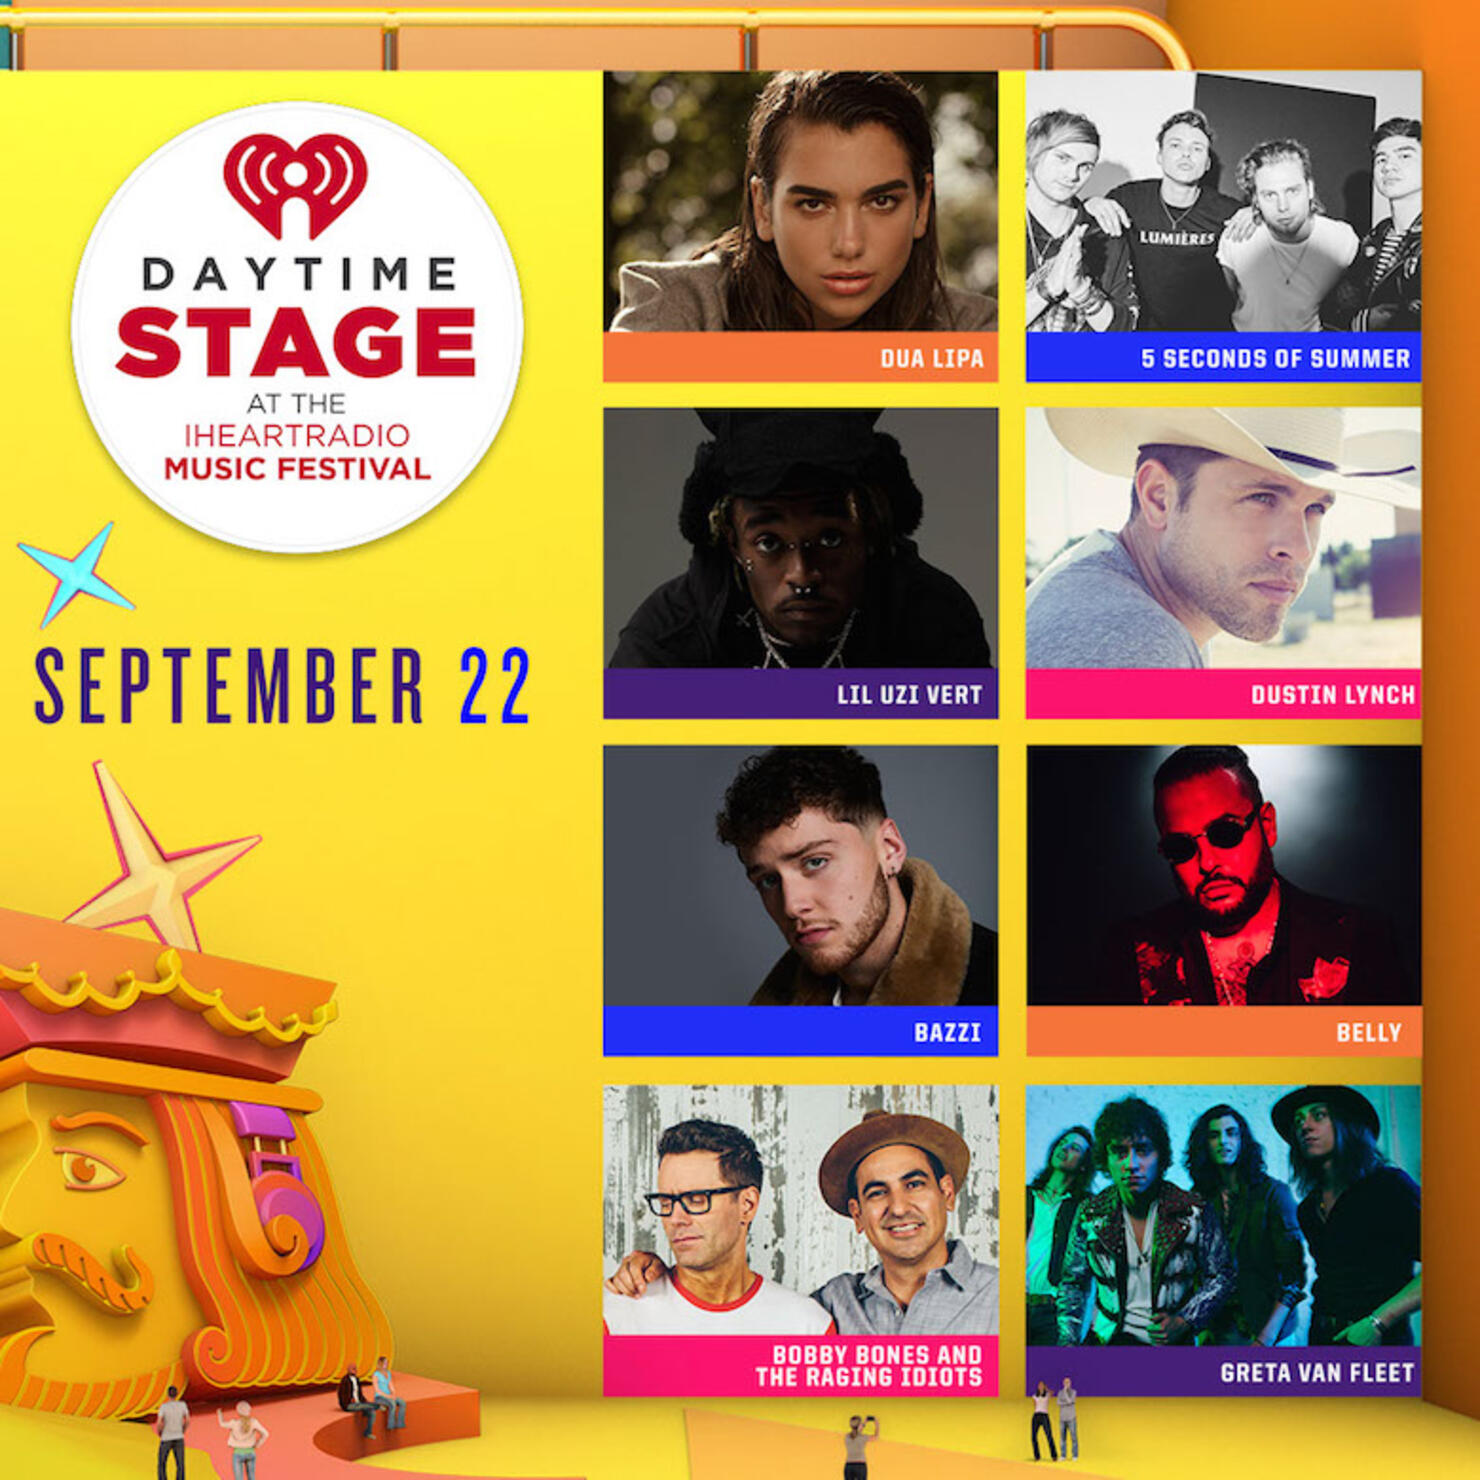 Daytime Stage delivers the goods at iHeartRadio Music Festival